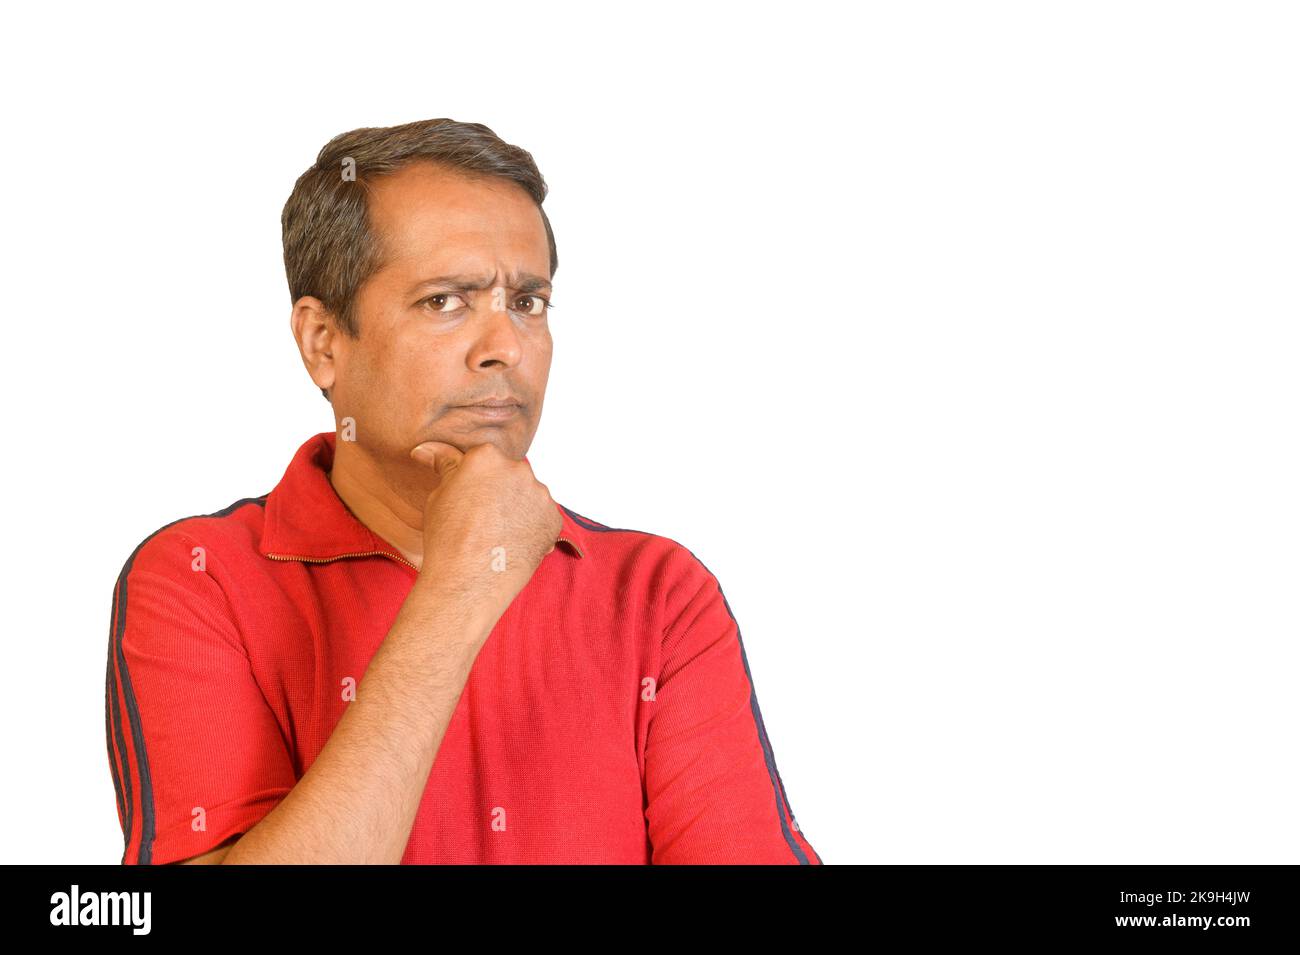 Studio portrait of a man with a worried look against a white isolated background Stock Photo